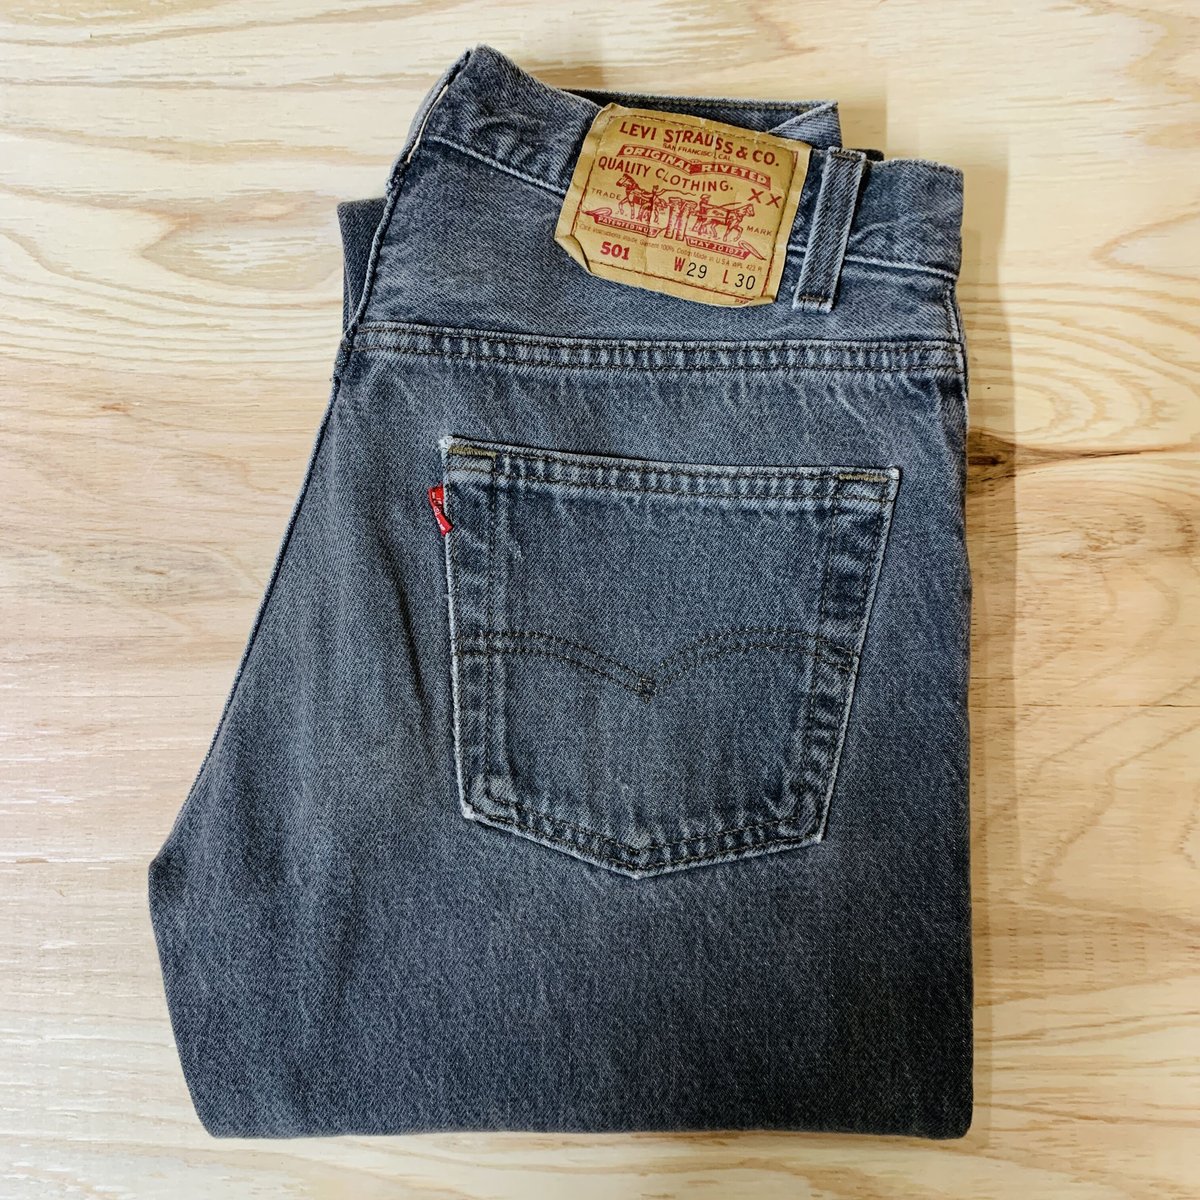 Levis 501 MADE IN U.S.A. W29 🇺🇸 | GALAPAGOS's S...